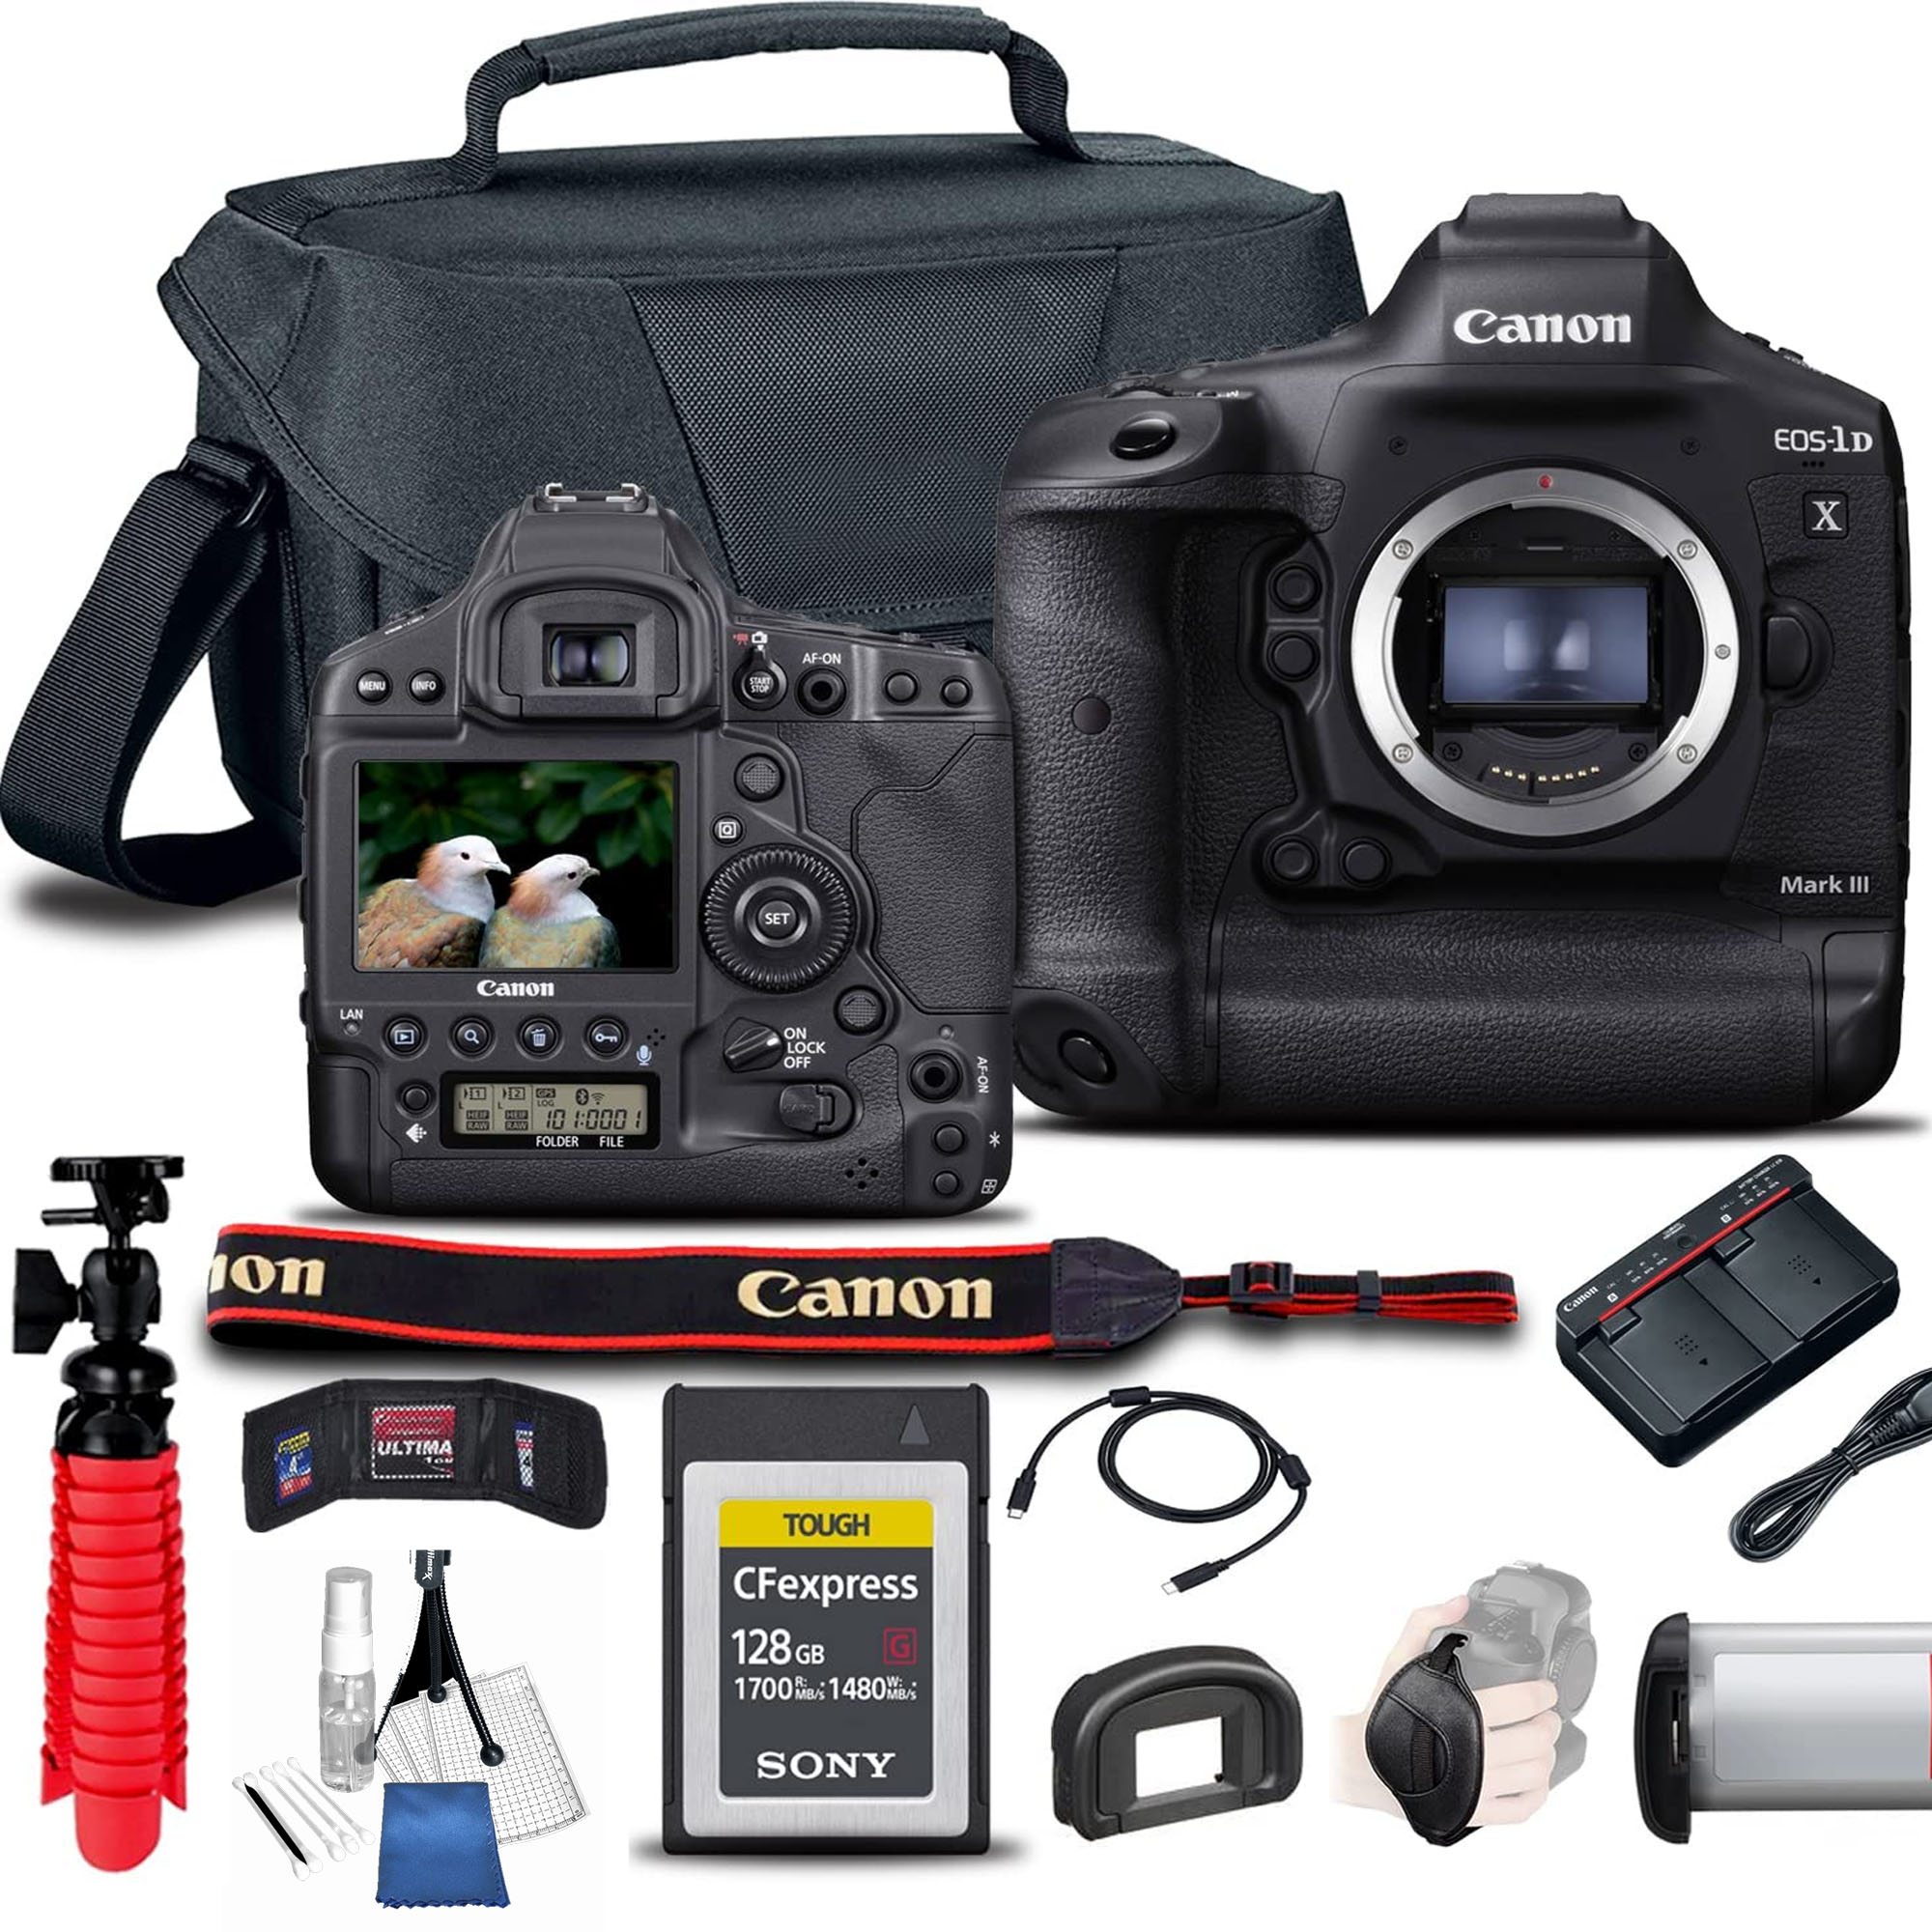 Canon EOS:1D X Mark III DSLR Camera With CFexpress &amp; More - image 1 of 1